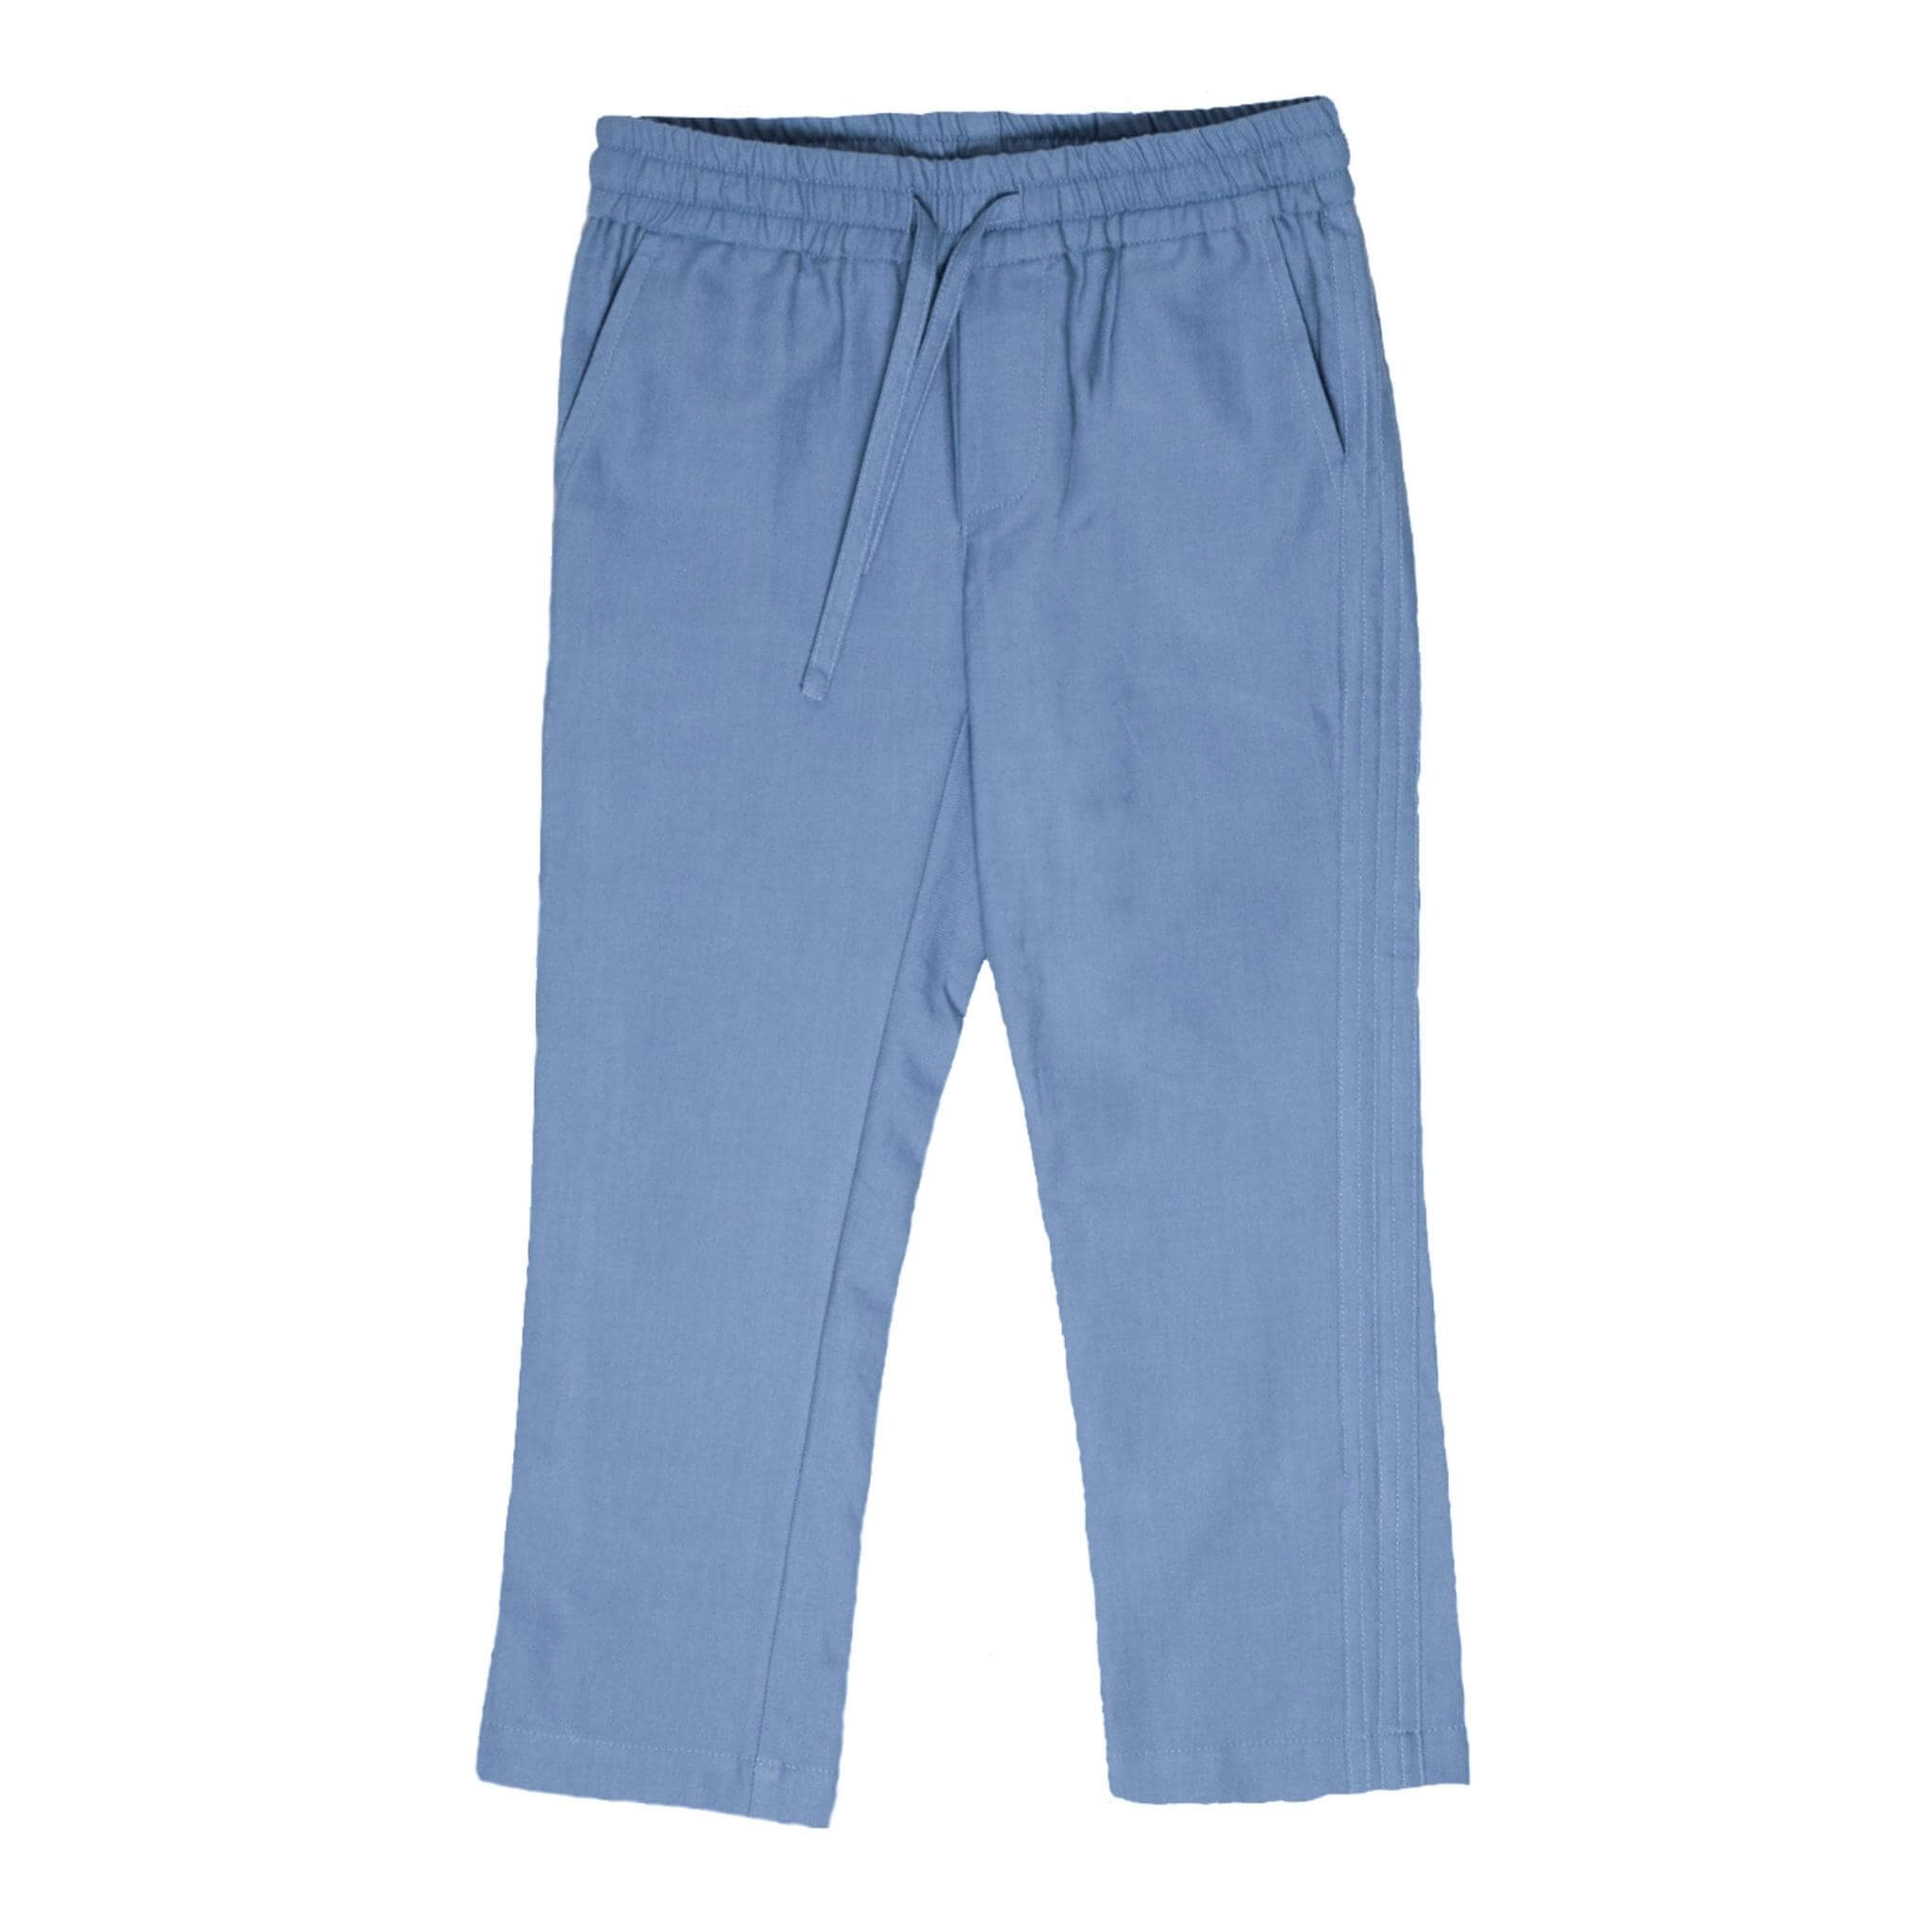 The perfect jean from our Kids Essentials collection. Soft Denim Pants in light blue, made of 100% organic Japanese cotton for sustainable and high-quality fashion